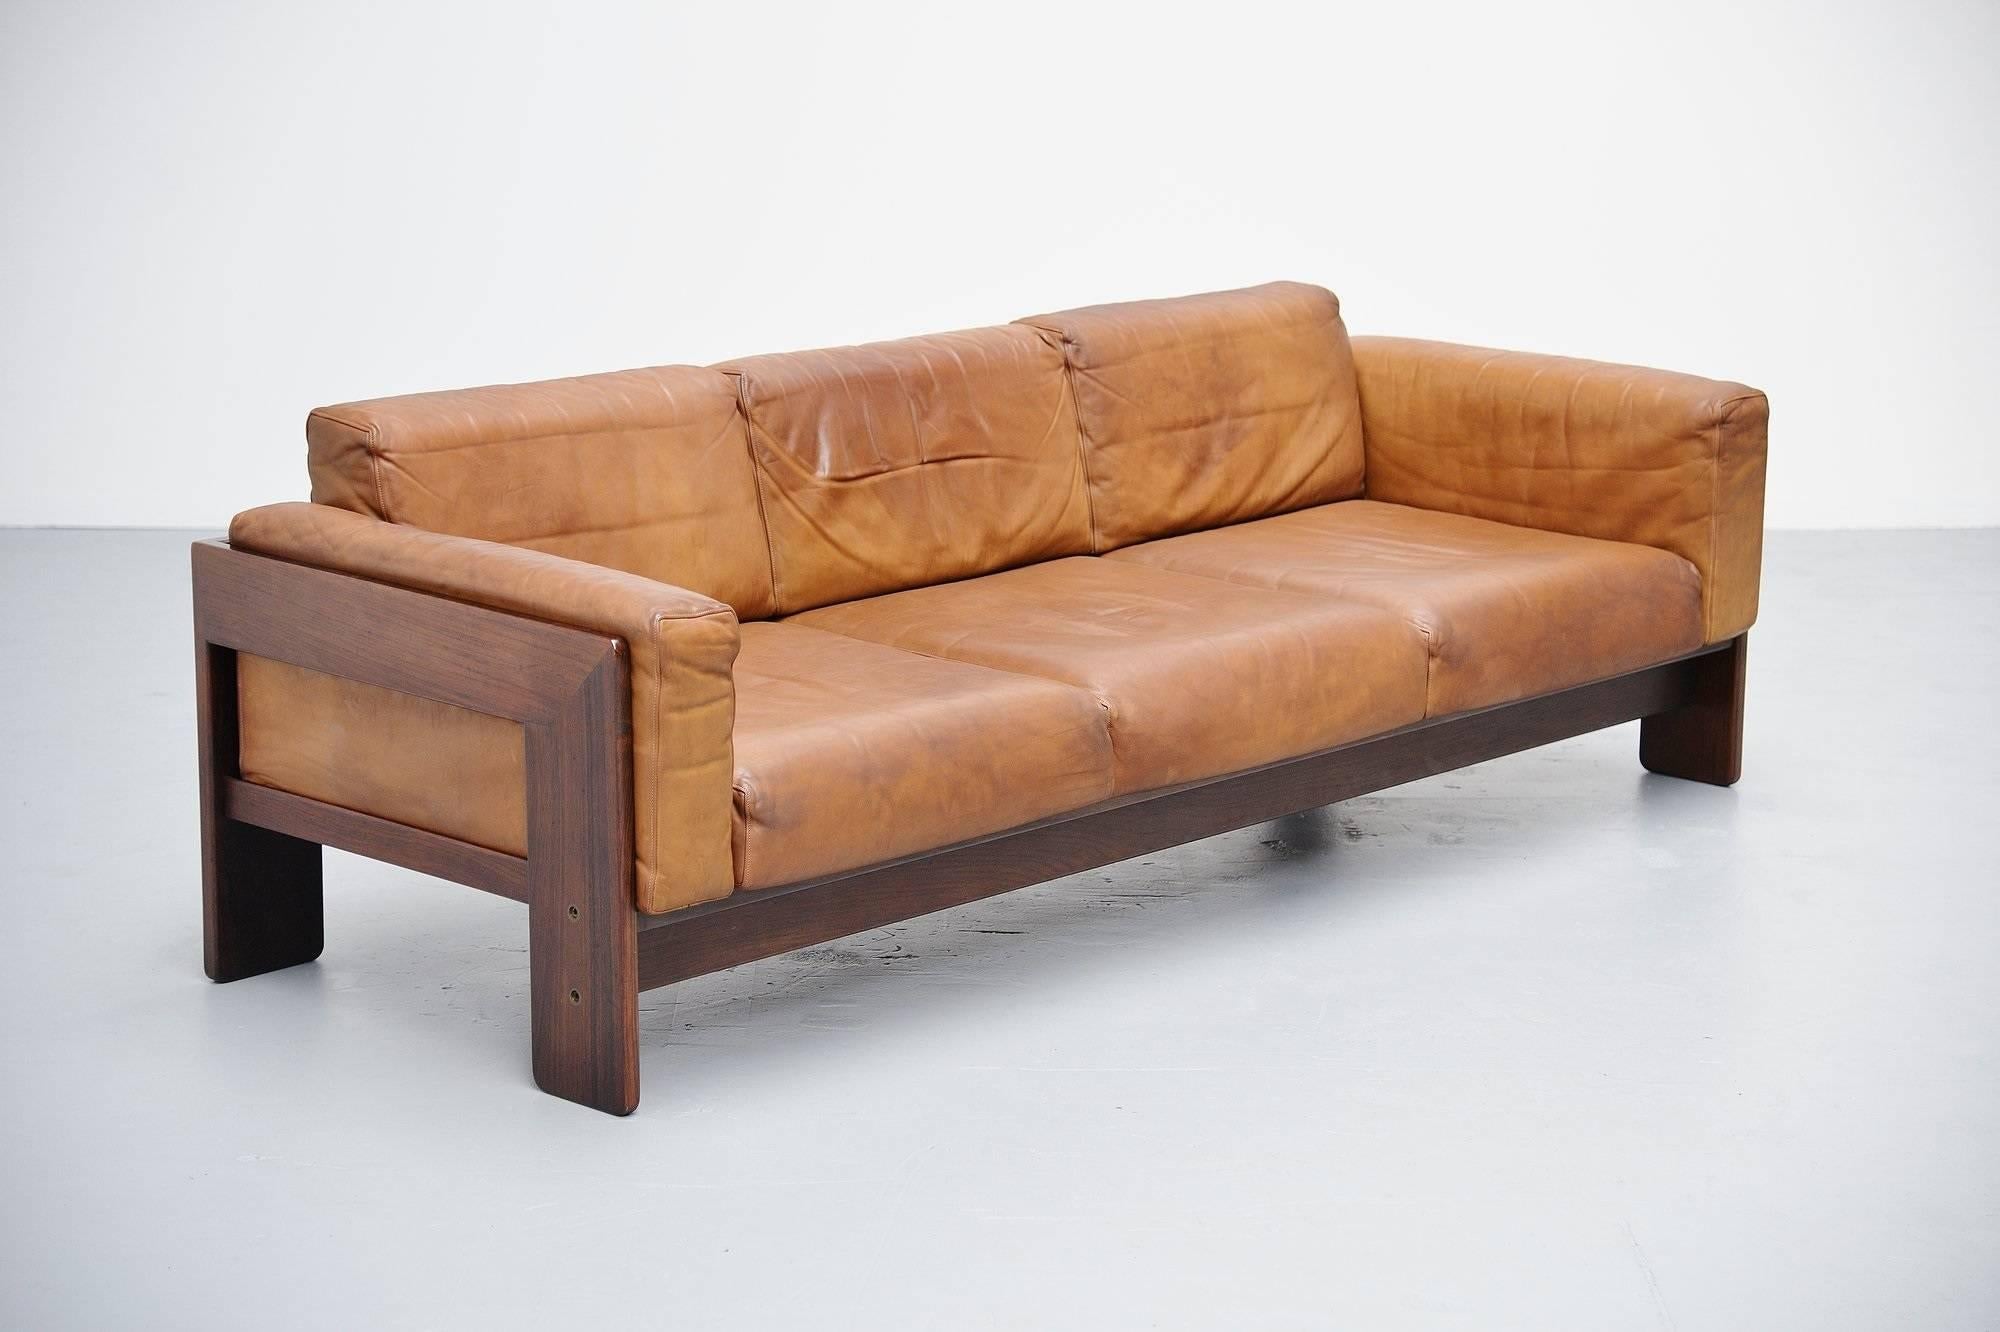 Very nice and comfortable lounge sofa from the Bastiano series, designed by Afra & Tobia Scarpa for Gavina, Italy, 1968. This sofa has a solid rosewood frame and very nice natural leather cushions. This is for the largest version available in these